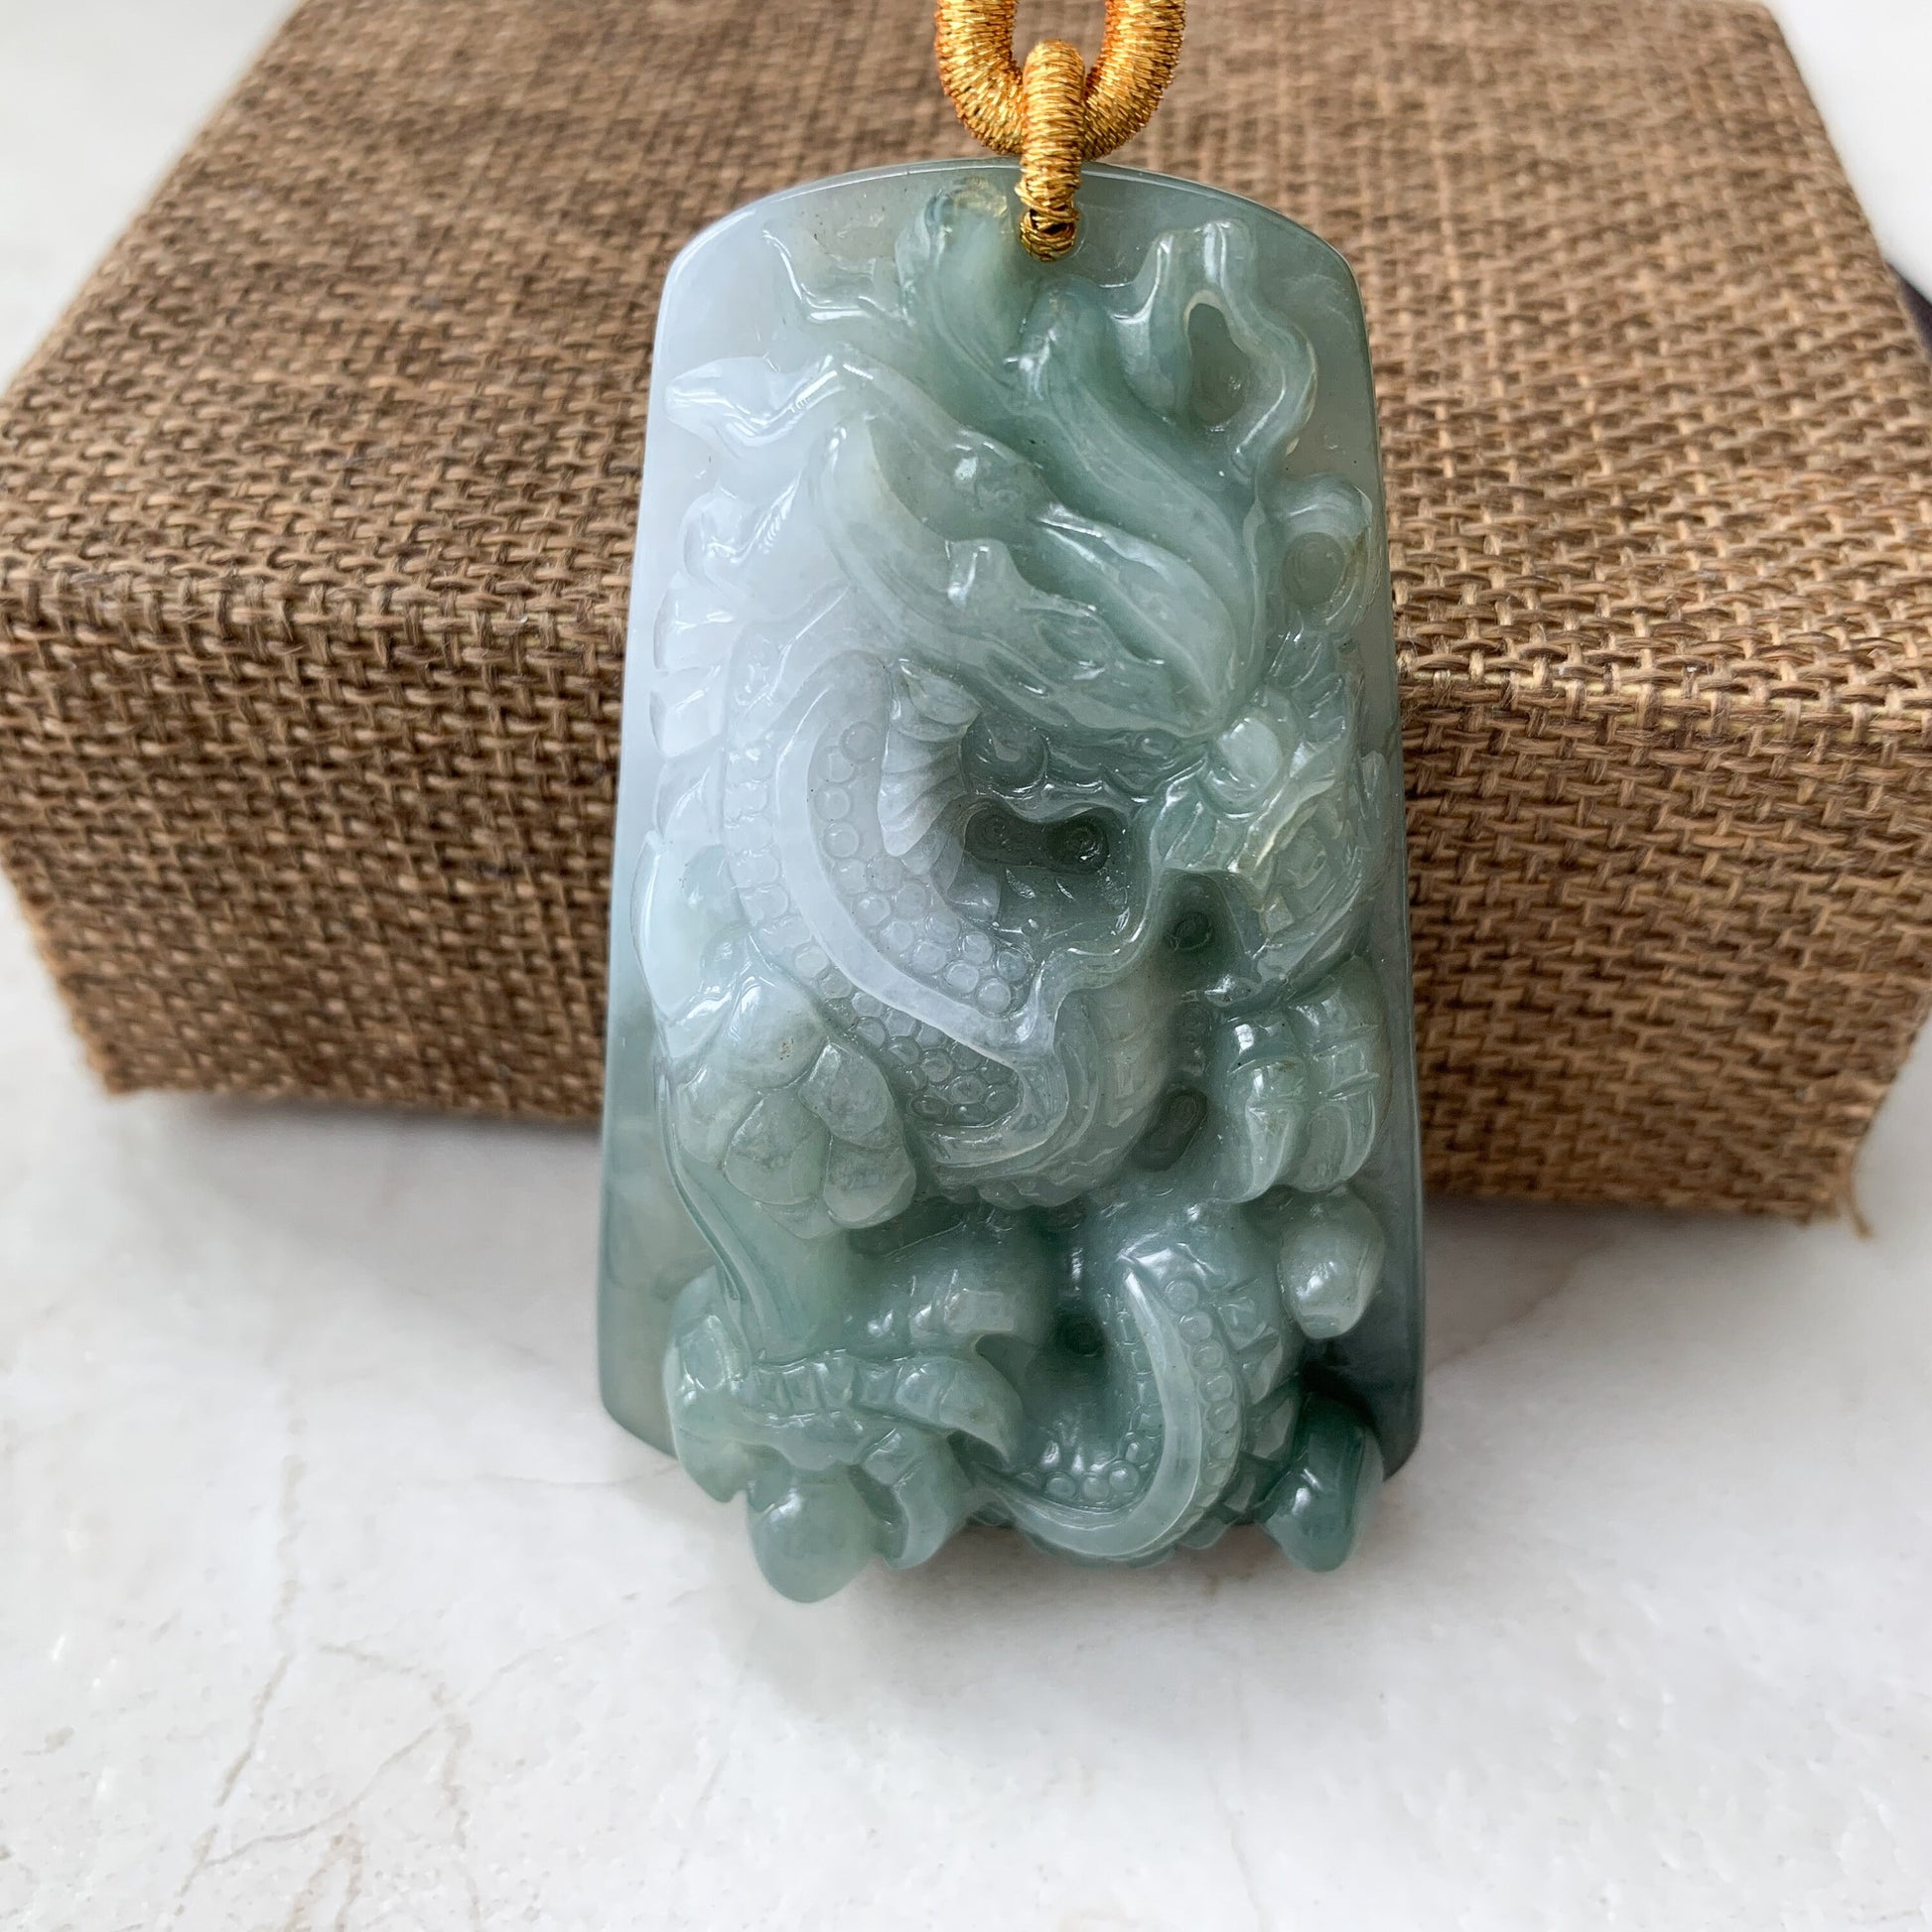 Large Jadeite Jade Dragon Chinese Zodiac Hand Carved Pendant Necklace, YJ-0321-0441007 - AriaDesignCollection